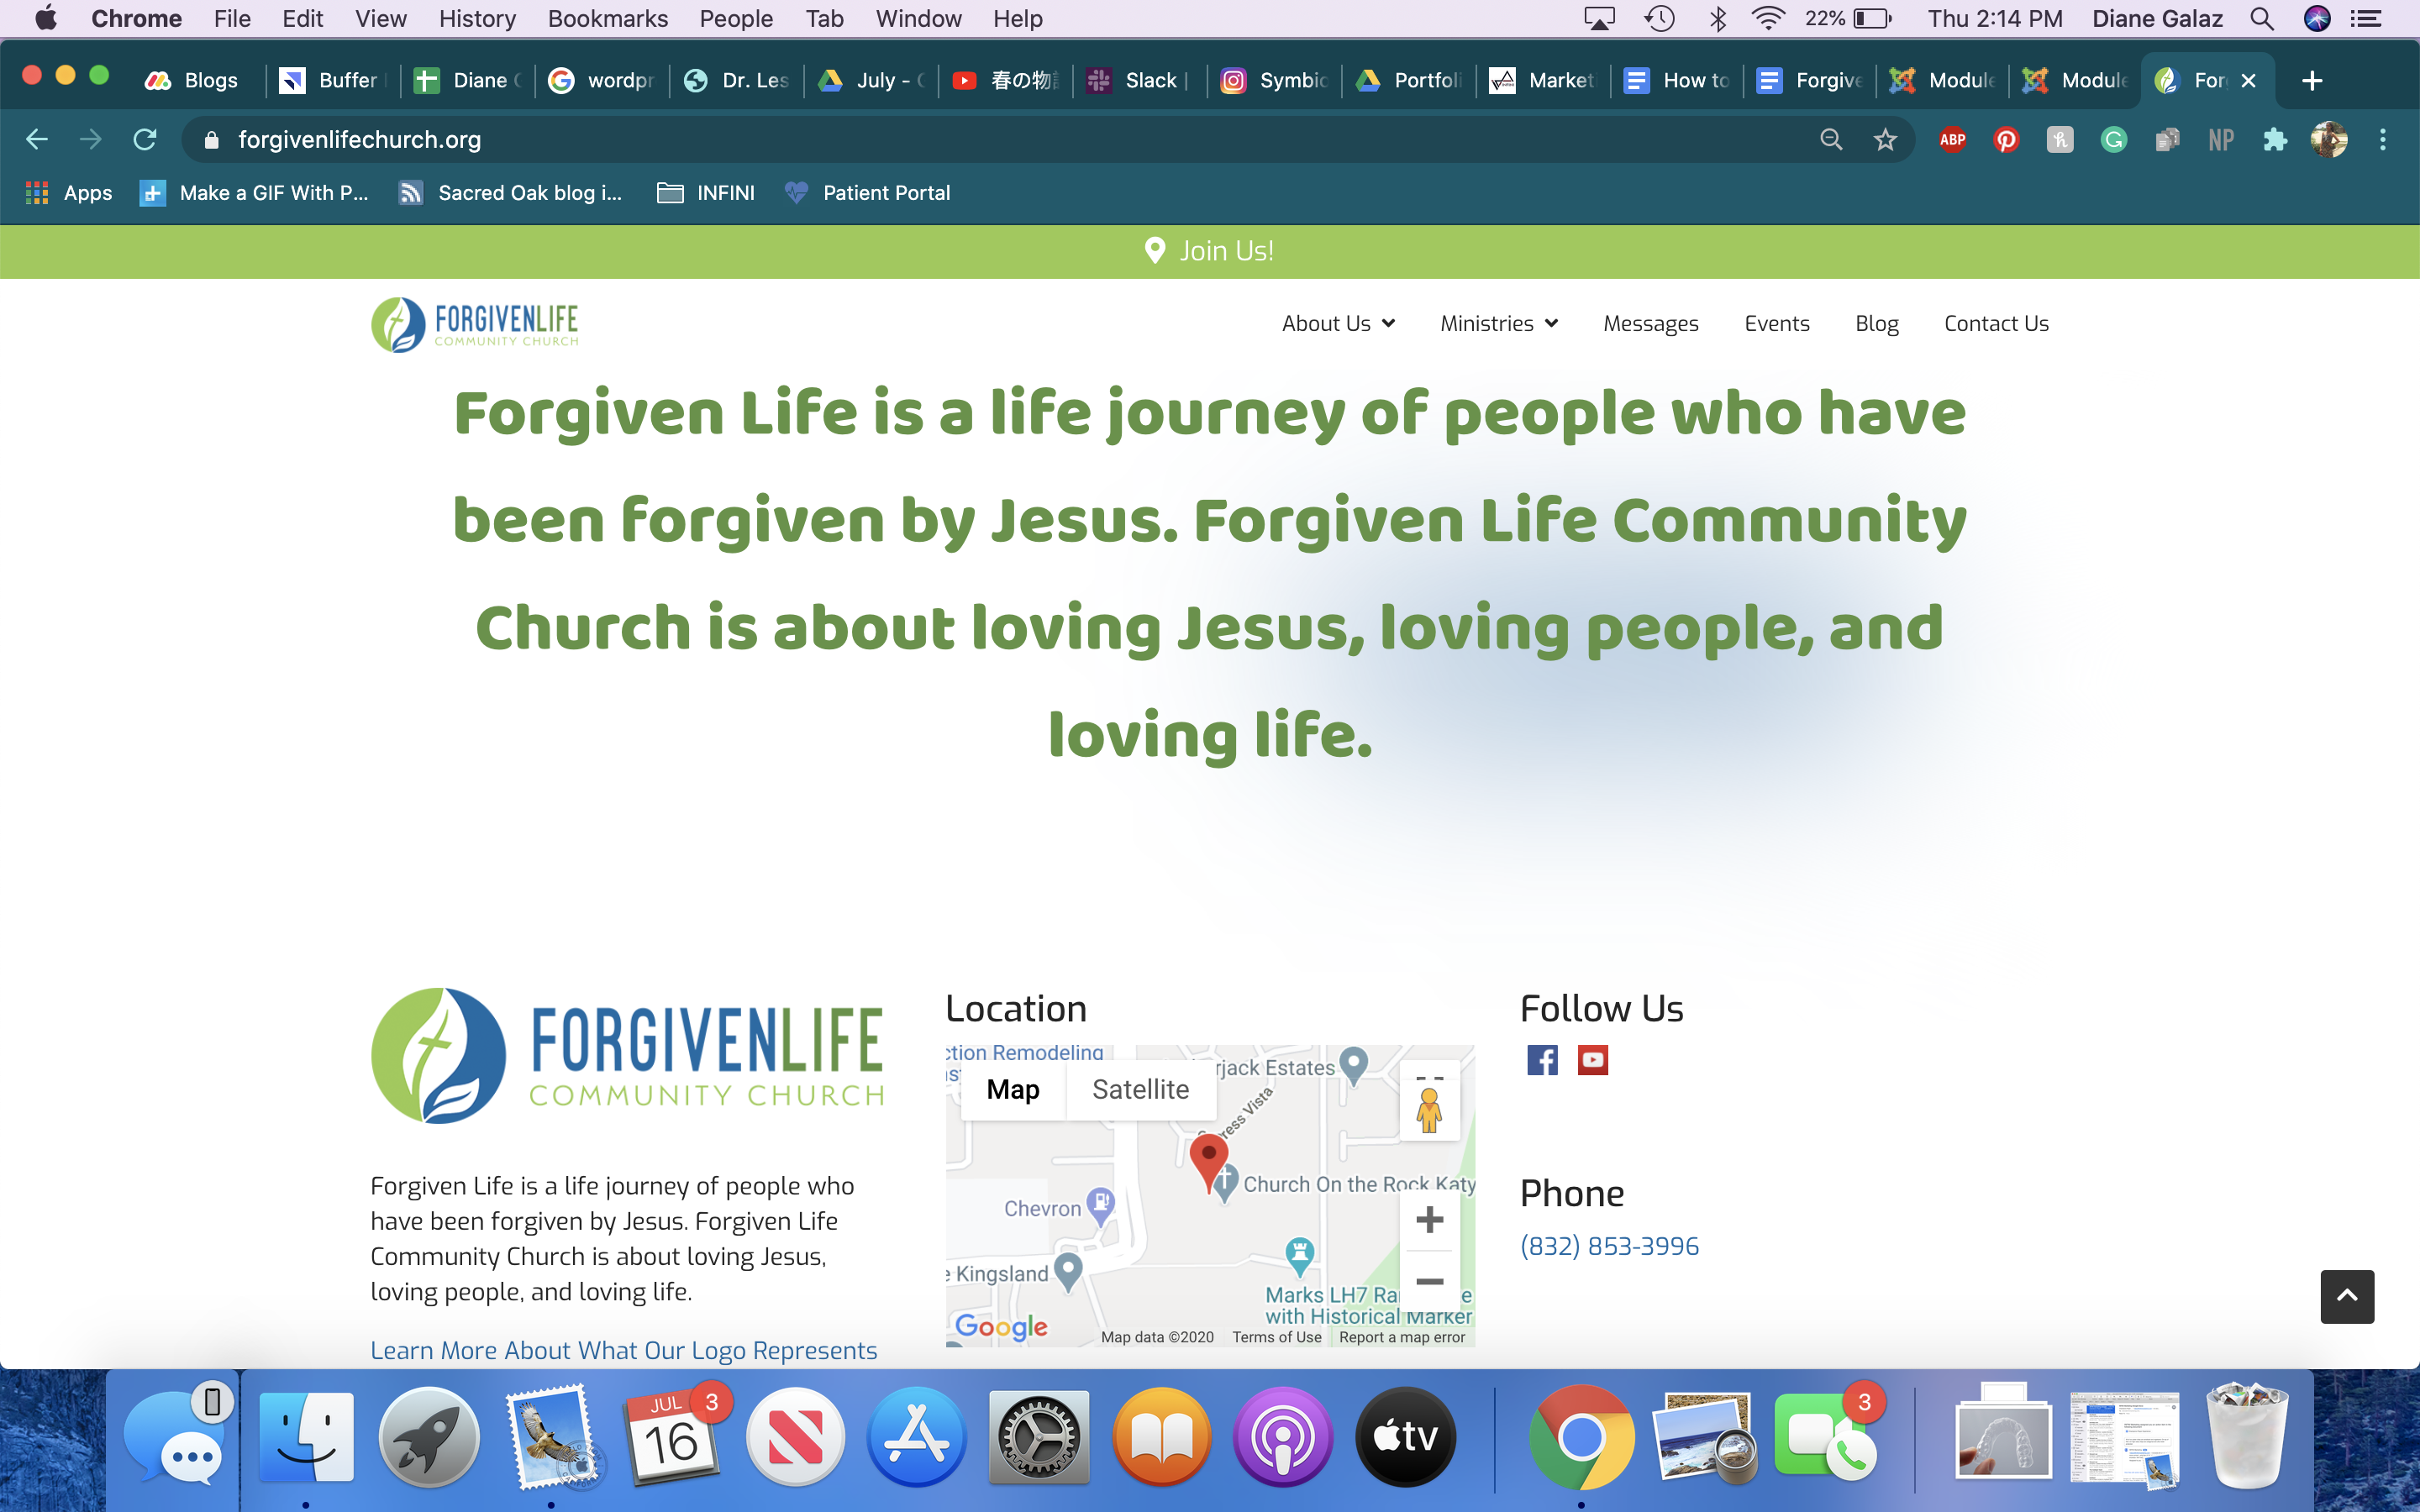 Forgiven Life Church Homepage Map and About